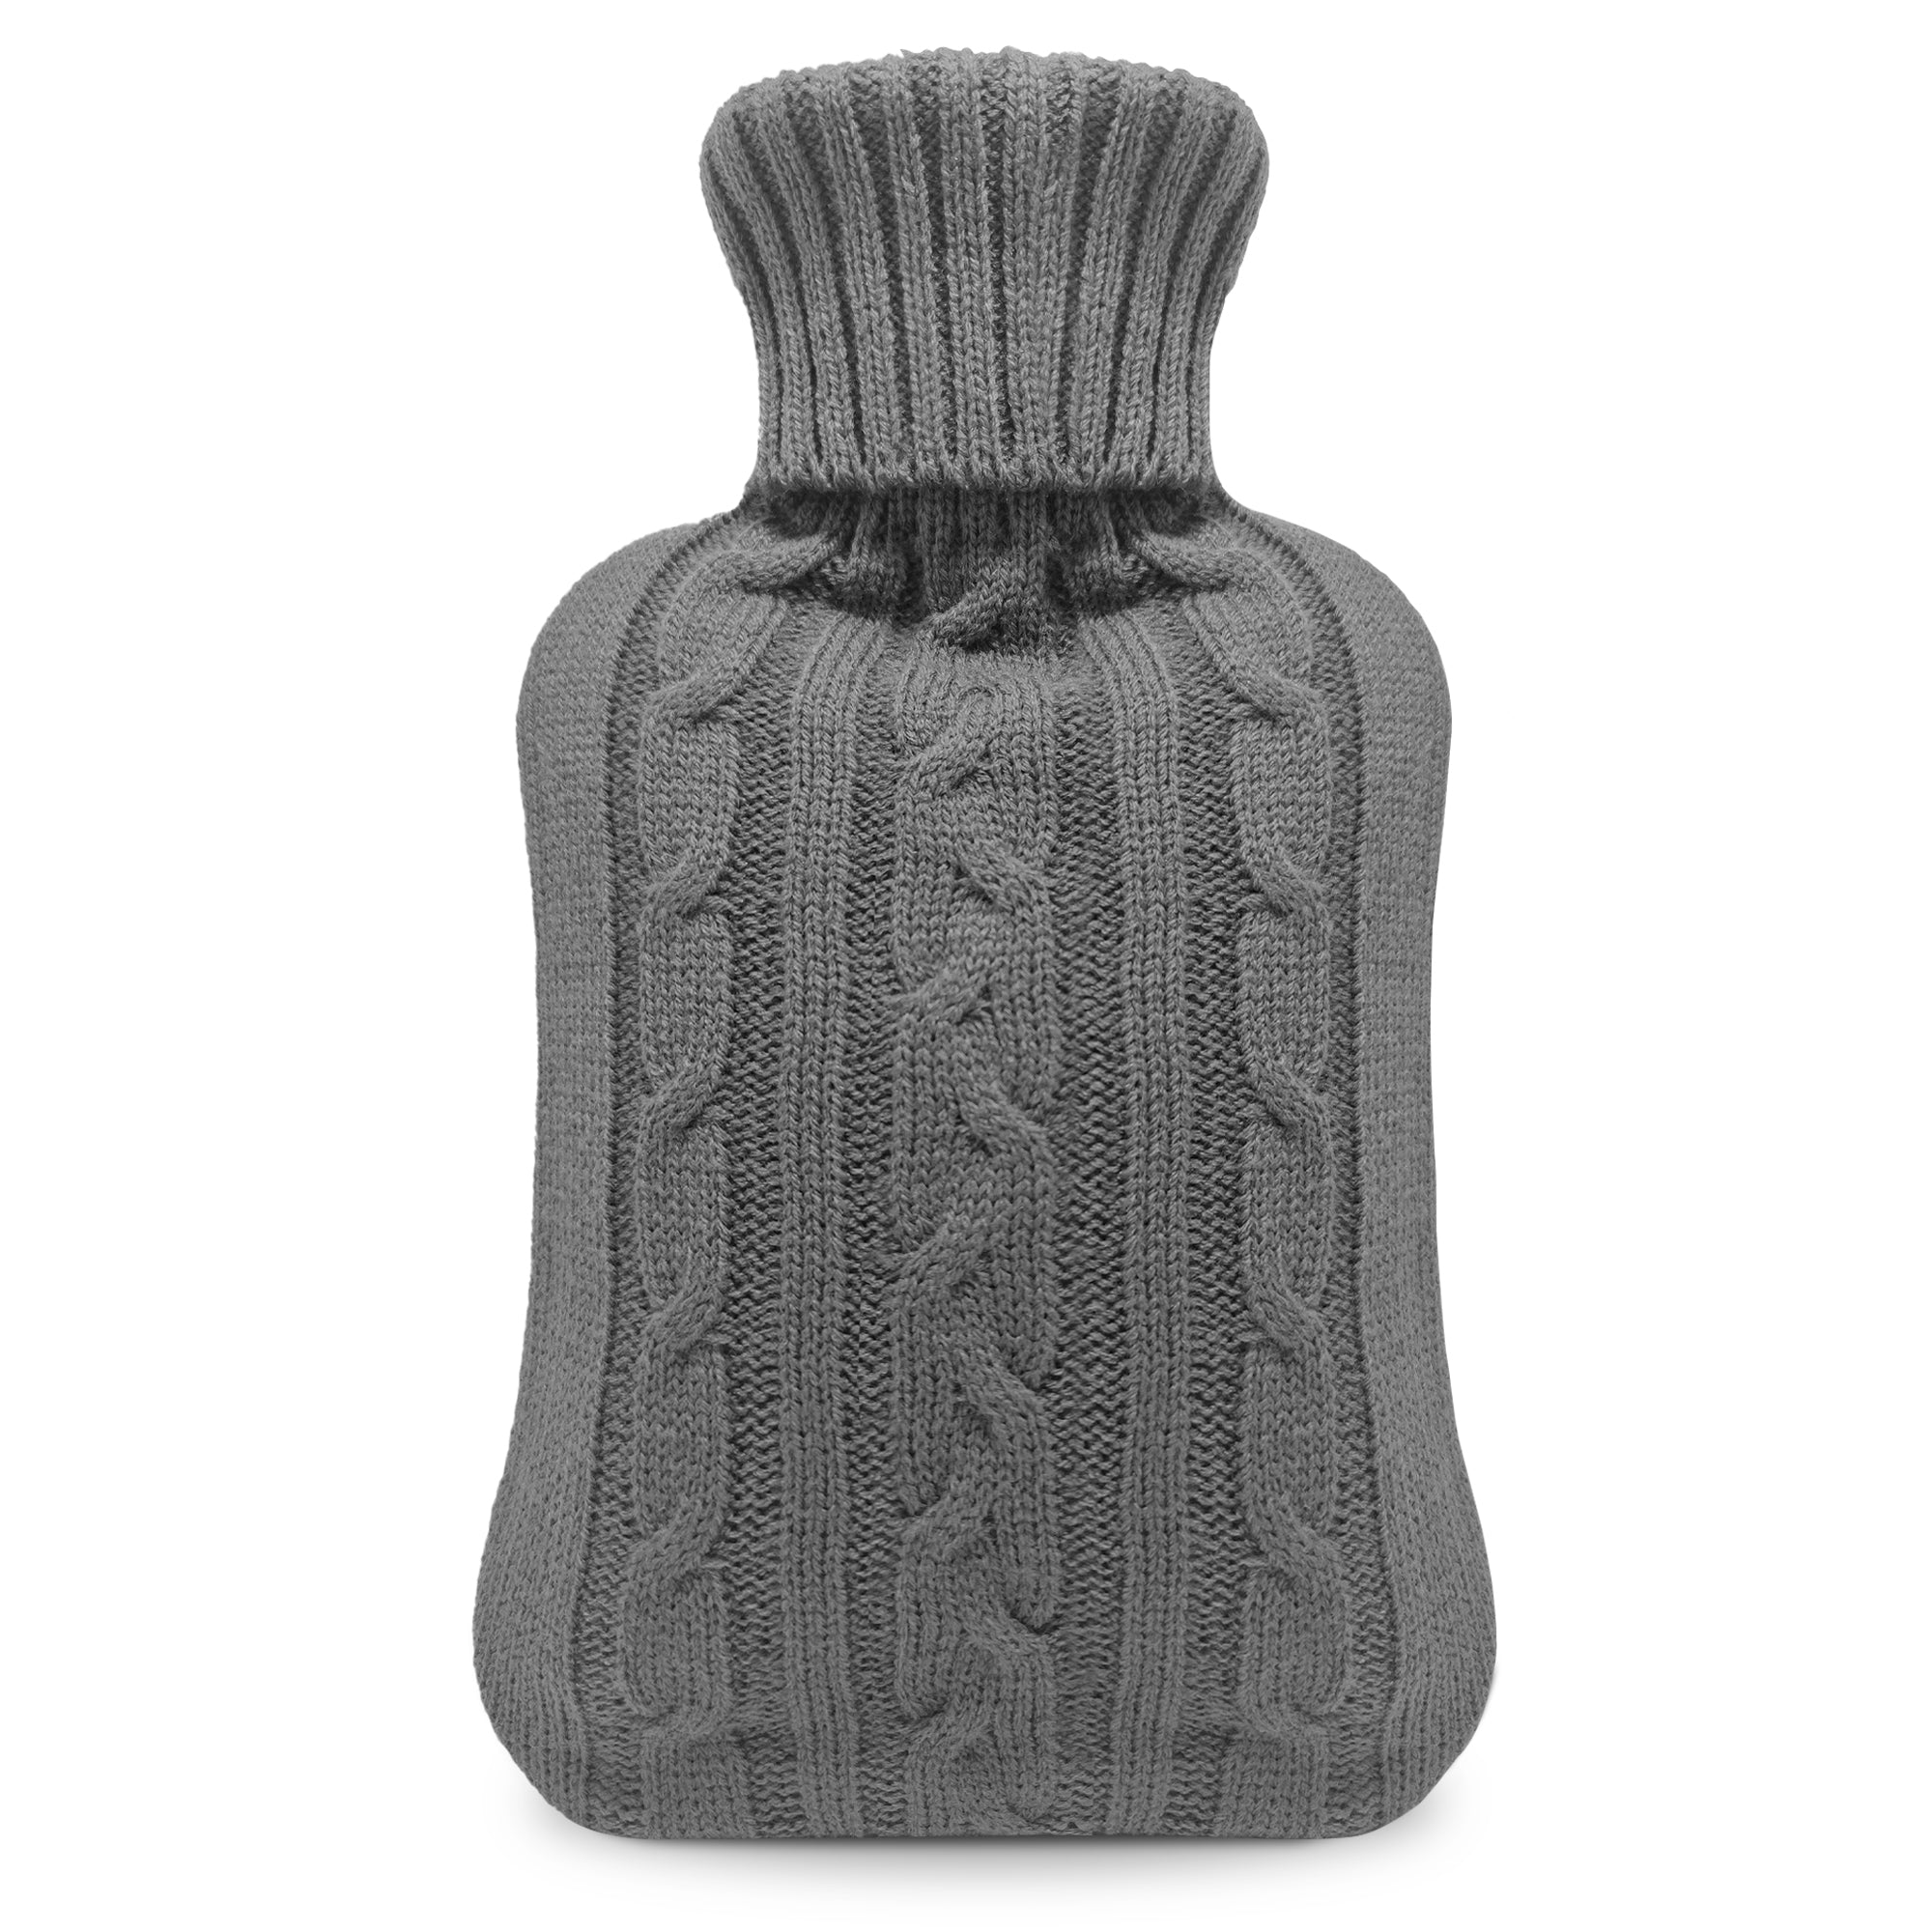 Luxury Hot Water Bottle - Extra Soft Cover, Thermal Rubber Bottle Covered with Premium Faux Fur